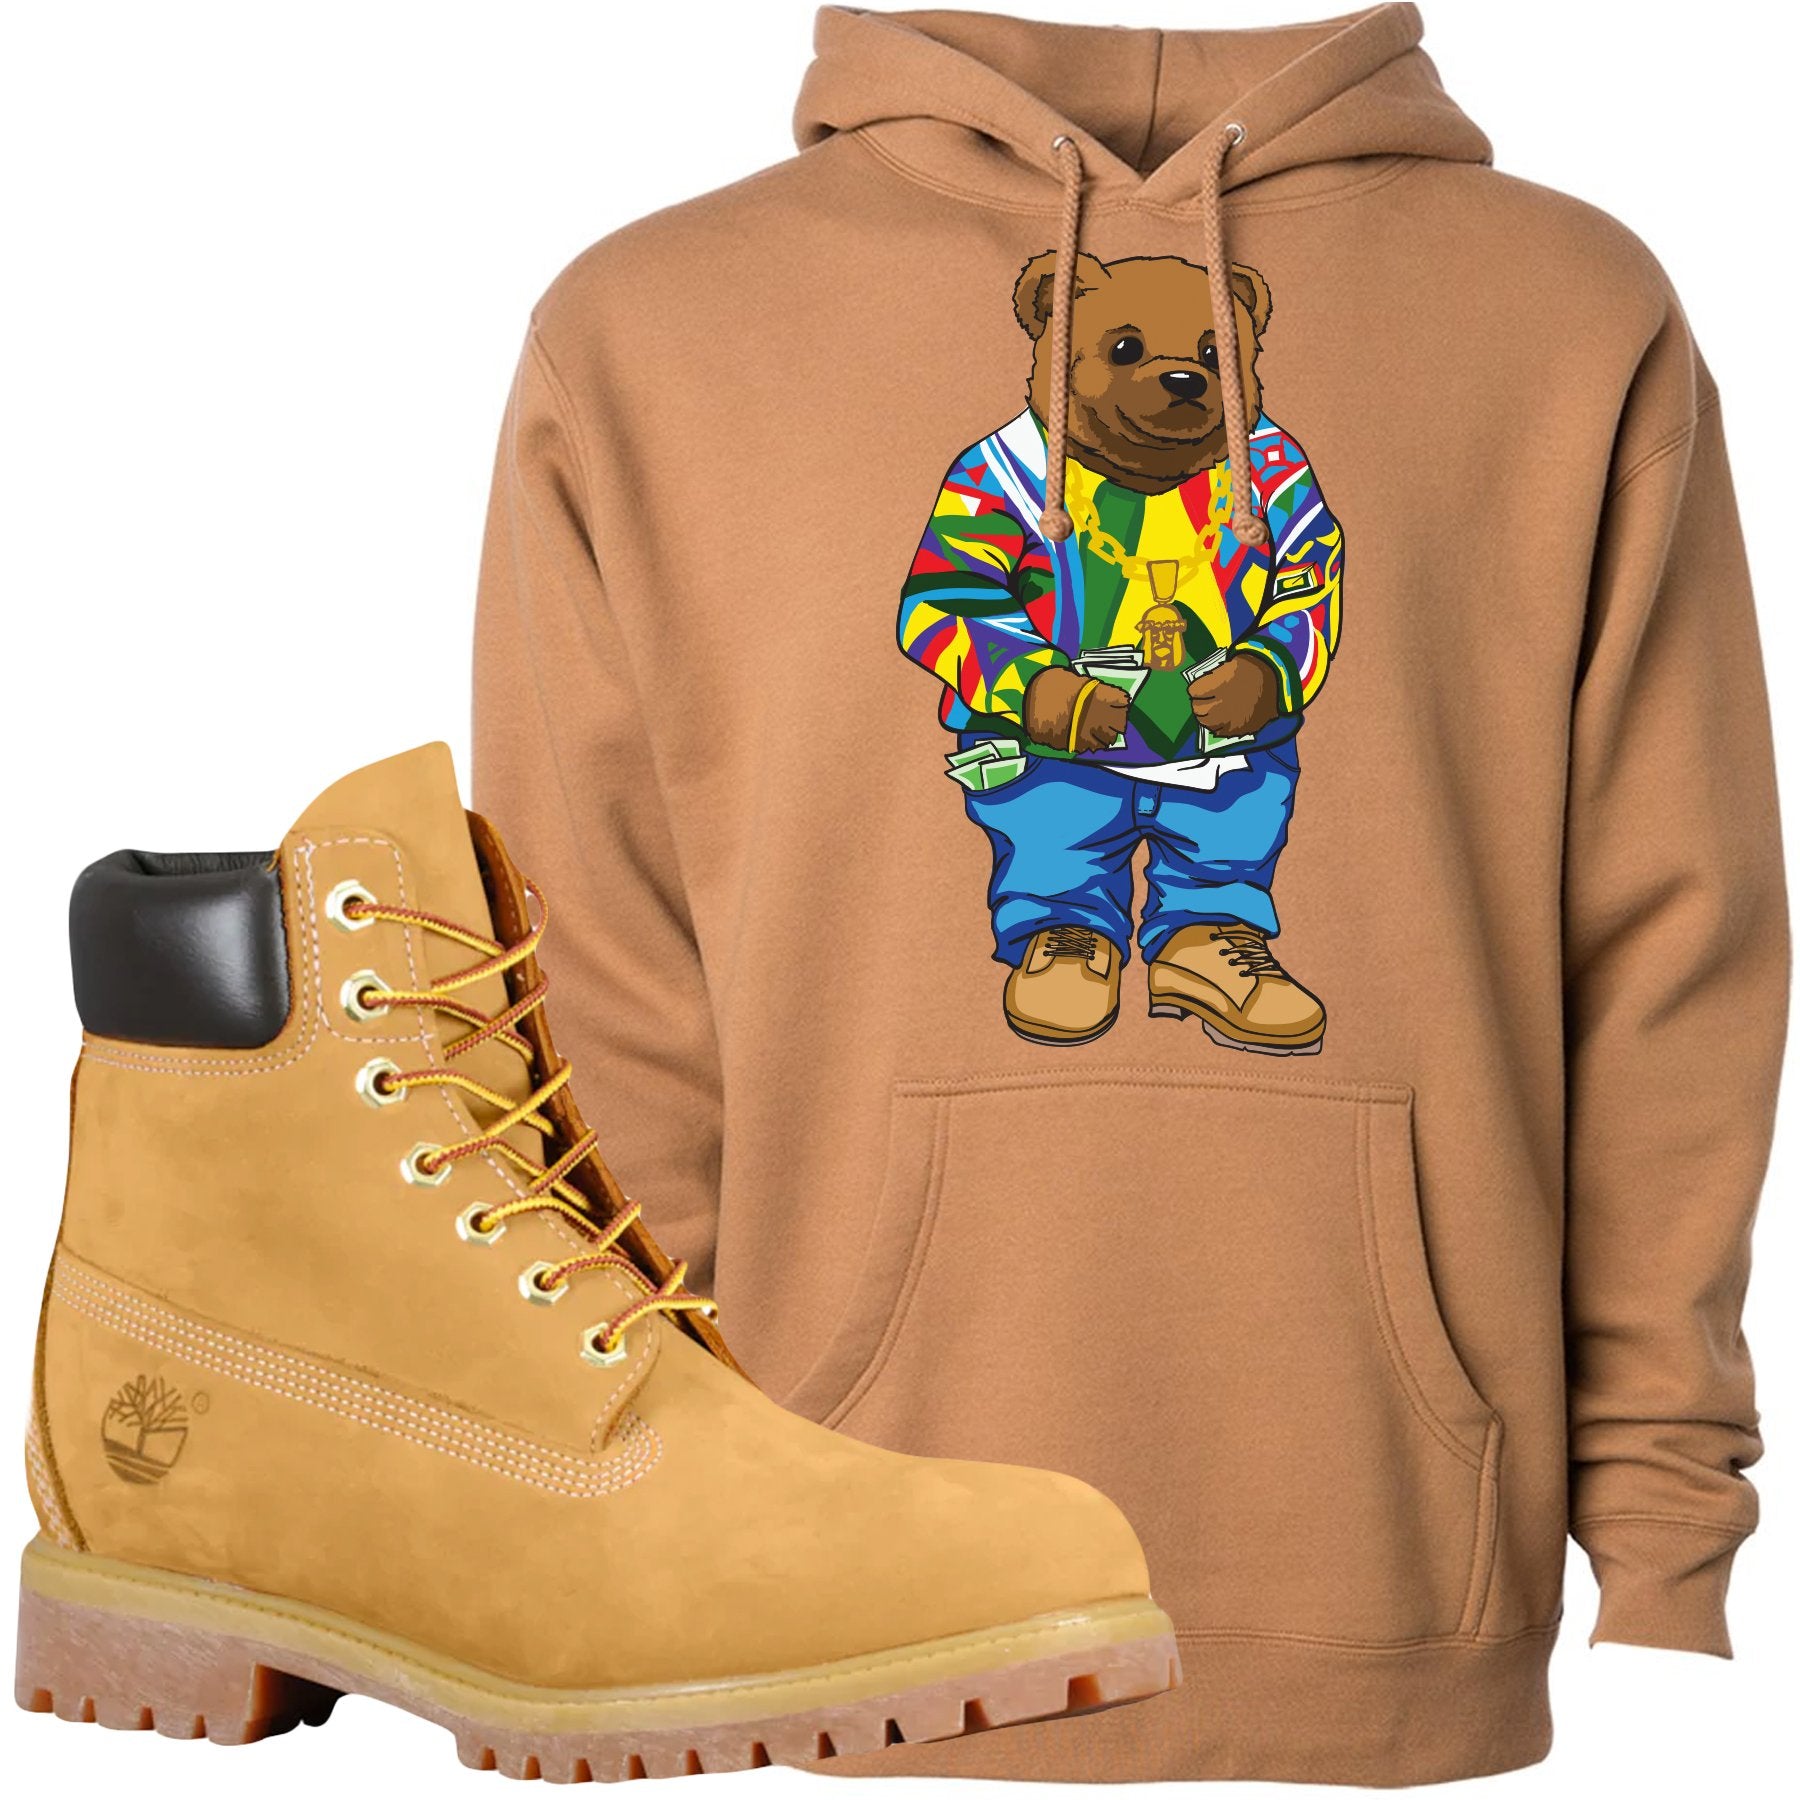 Wear this Timberland "Wheat Timbs" Boot Matching hoodie to pair with your Wheat Timberland Boots aka Butter Timbs